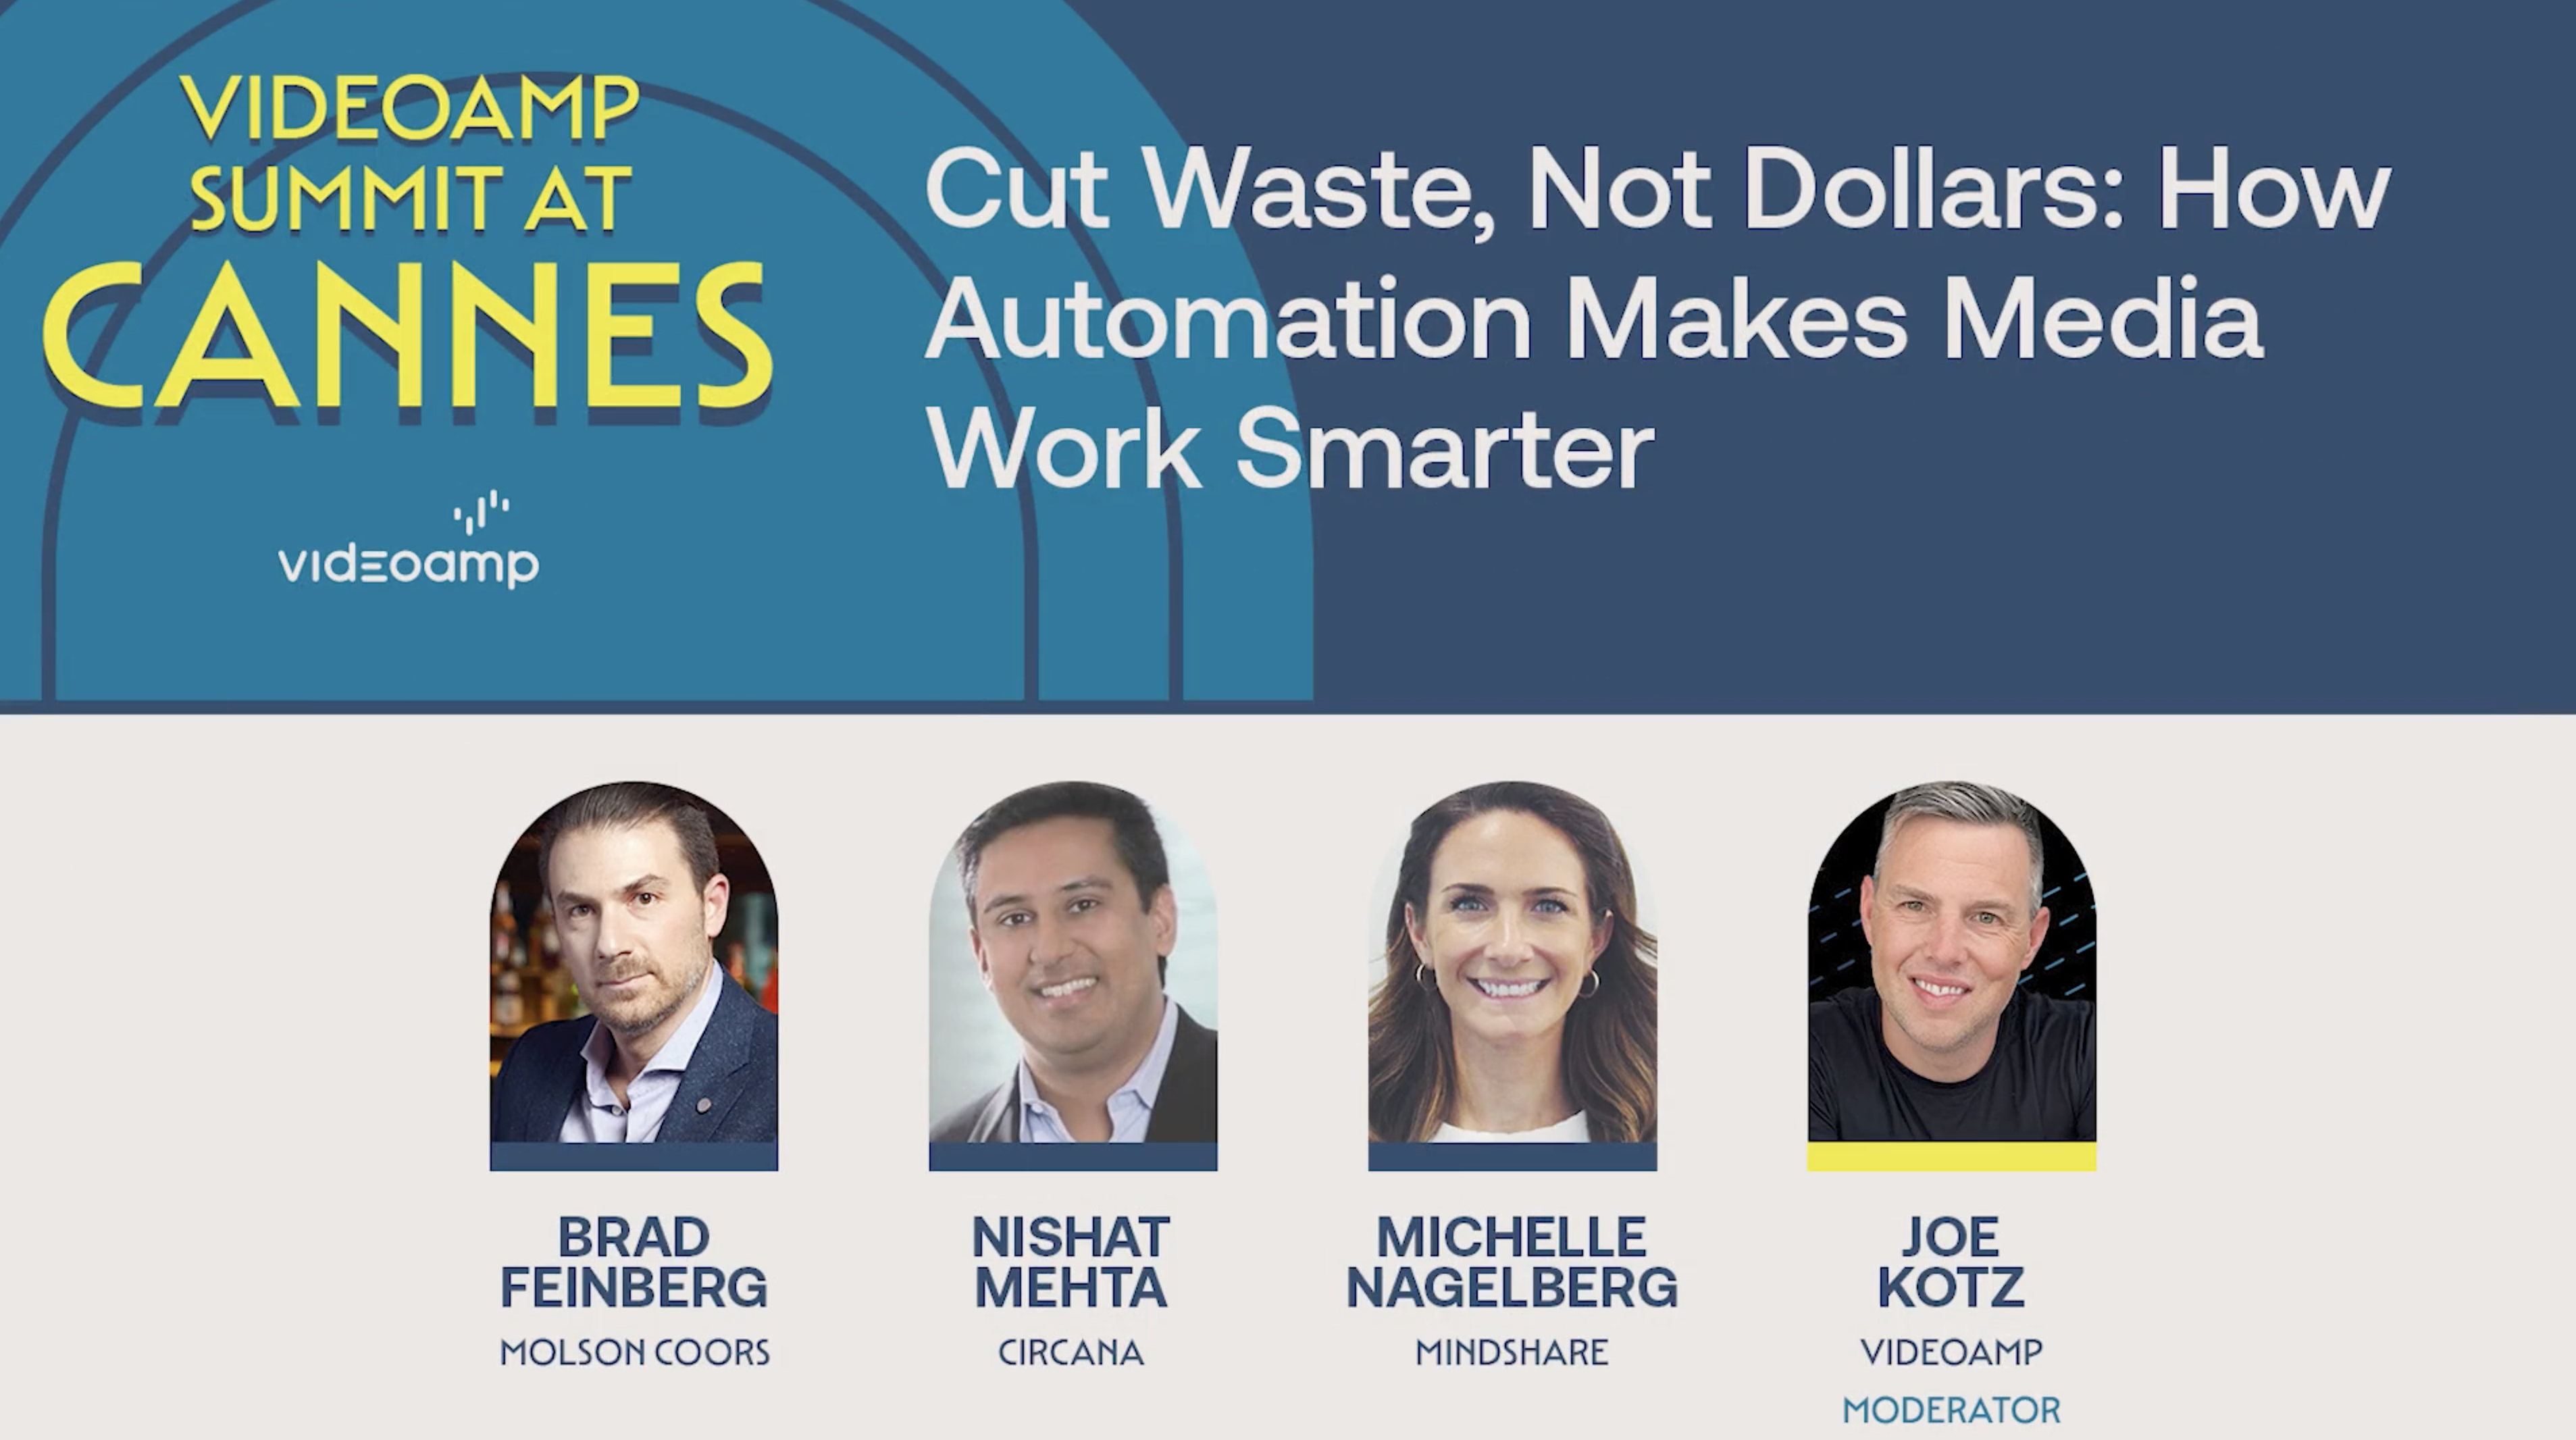 Cut Waste, Not Dollars: How Automation Makes Media Work Smarter